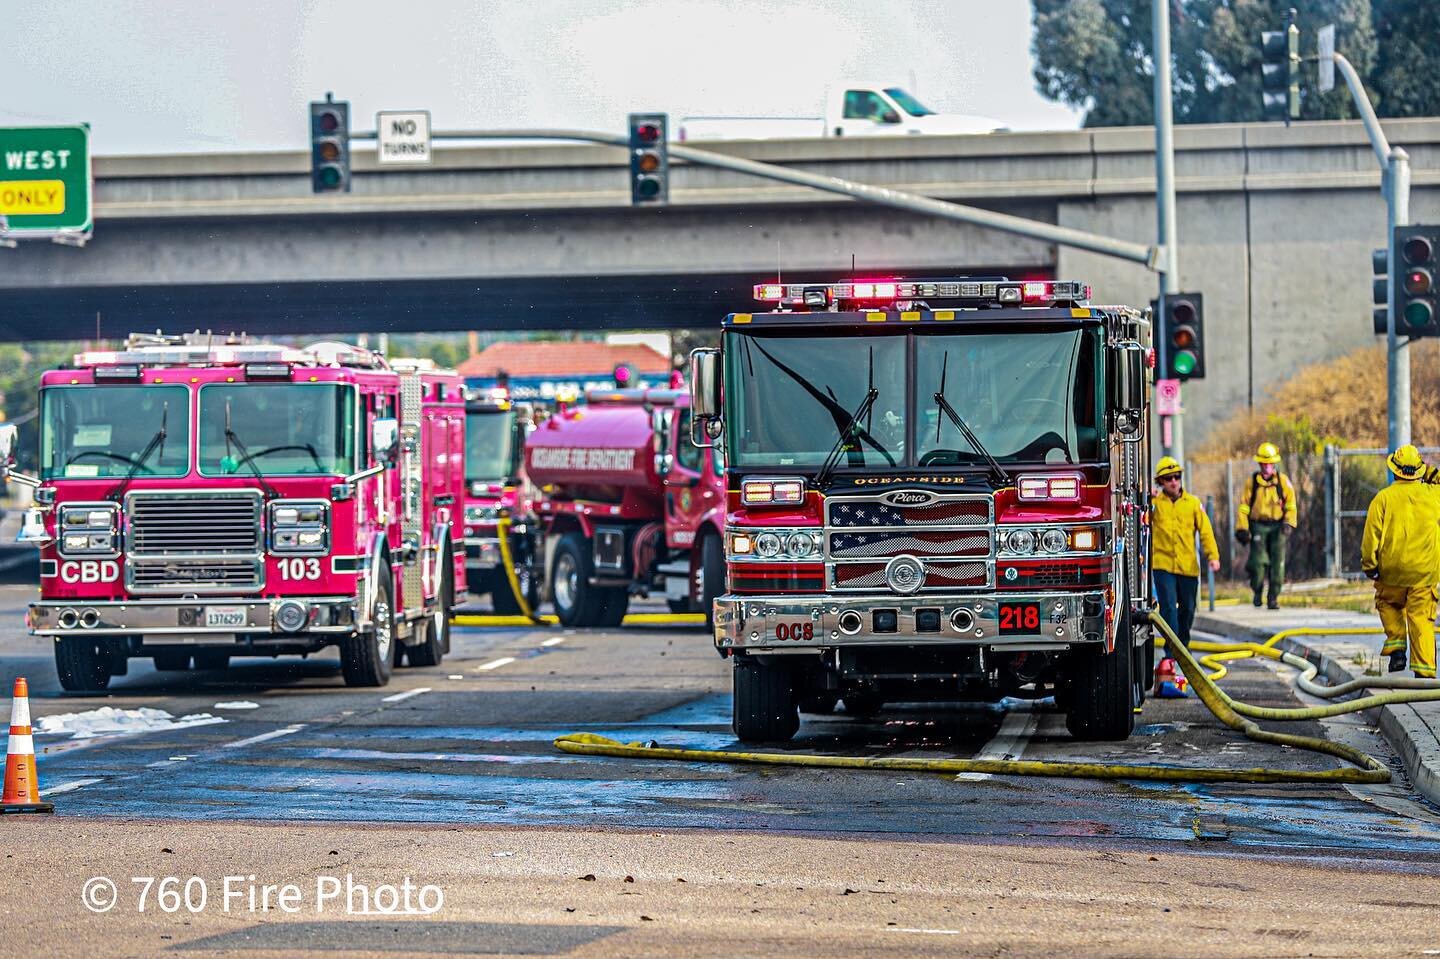 A few photos from this mornings vegetation fire off of the eastbound 78 freeway in the @vistacagov 
.
.
@vistafirefighters @oceansidefirefighters_3736 @carlsbadfirefighters3730 @sdsheriff 
.
.
#fire #firefighters #brushfire #furstdue #chiefmilleramba